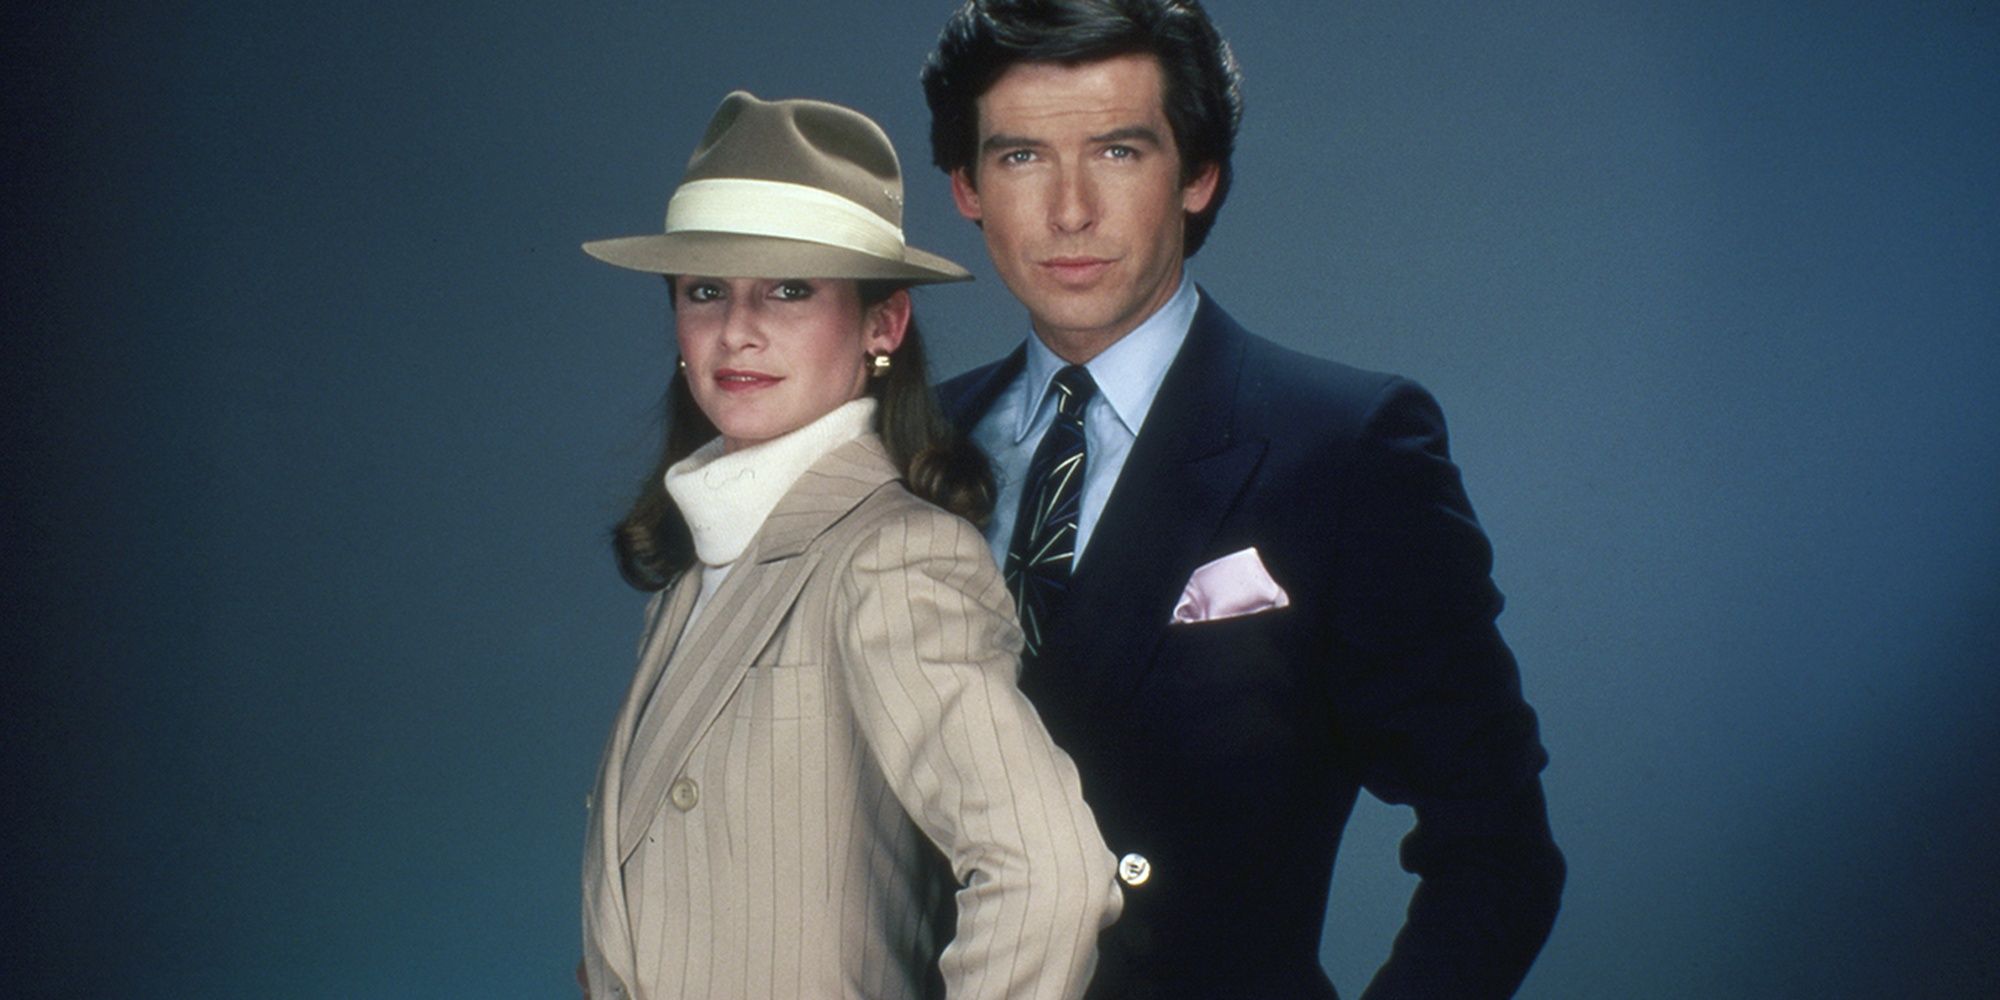 Remington Steele and Laura Holt looking sophisticated in Remington Steele